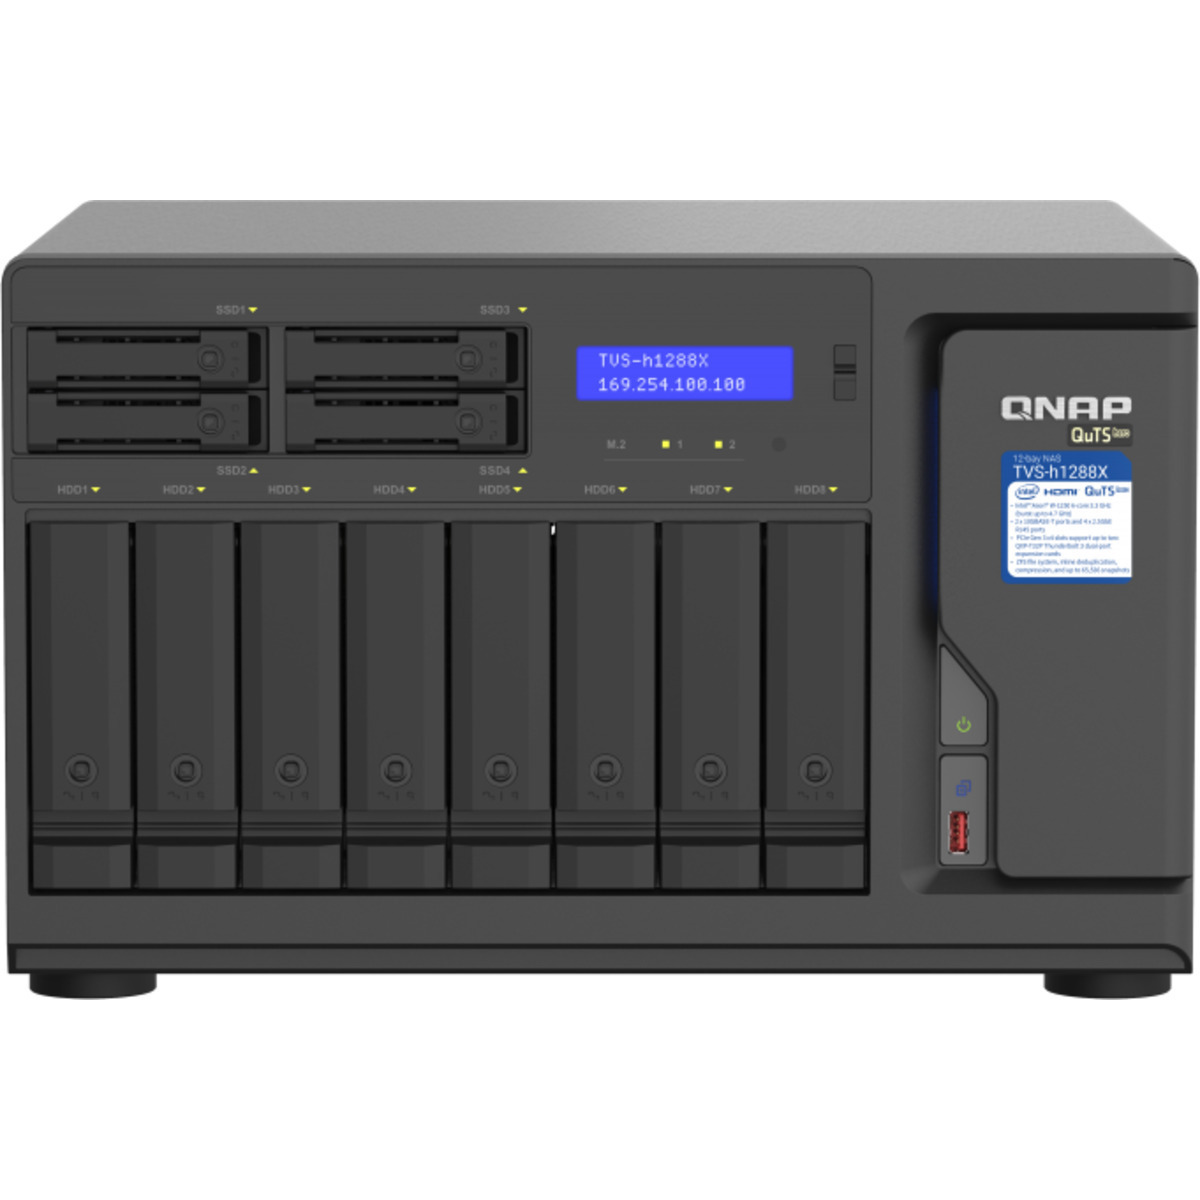 QNAP TVS-h1288X QuTS hero NAS 108tb 8+4-Bay Desktop Multimedia / Power User / Business NAS - Network Attached Storage Device 6x18tb Western Digital Red Pro WD181KFGX 3.5 7200rpm SATA 6Gb/s HDD NAS Class Drives Installed - Burn-In Tested TVS-h1288X QuTS hero NAS